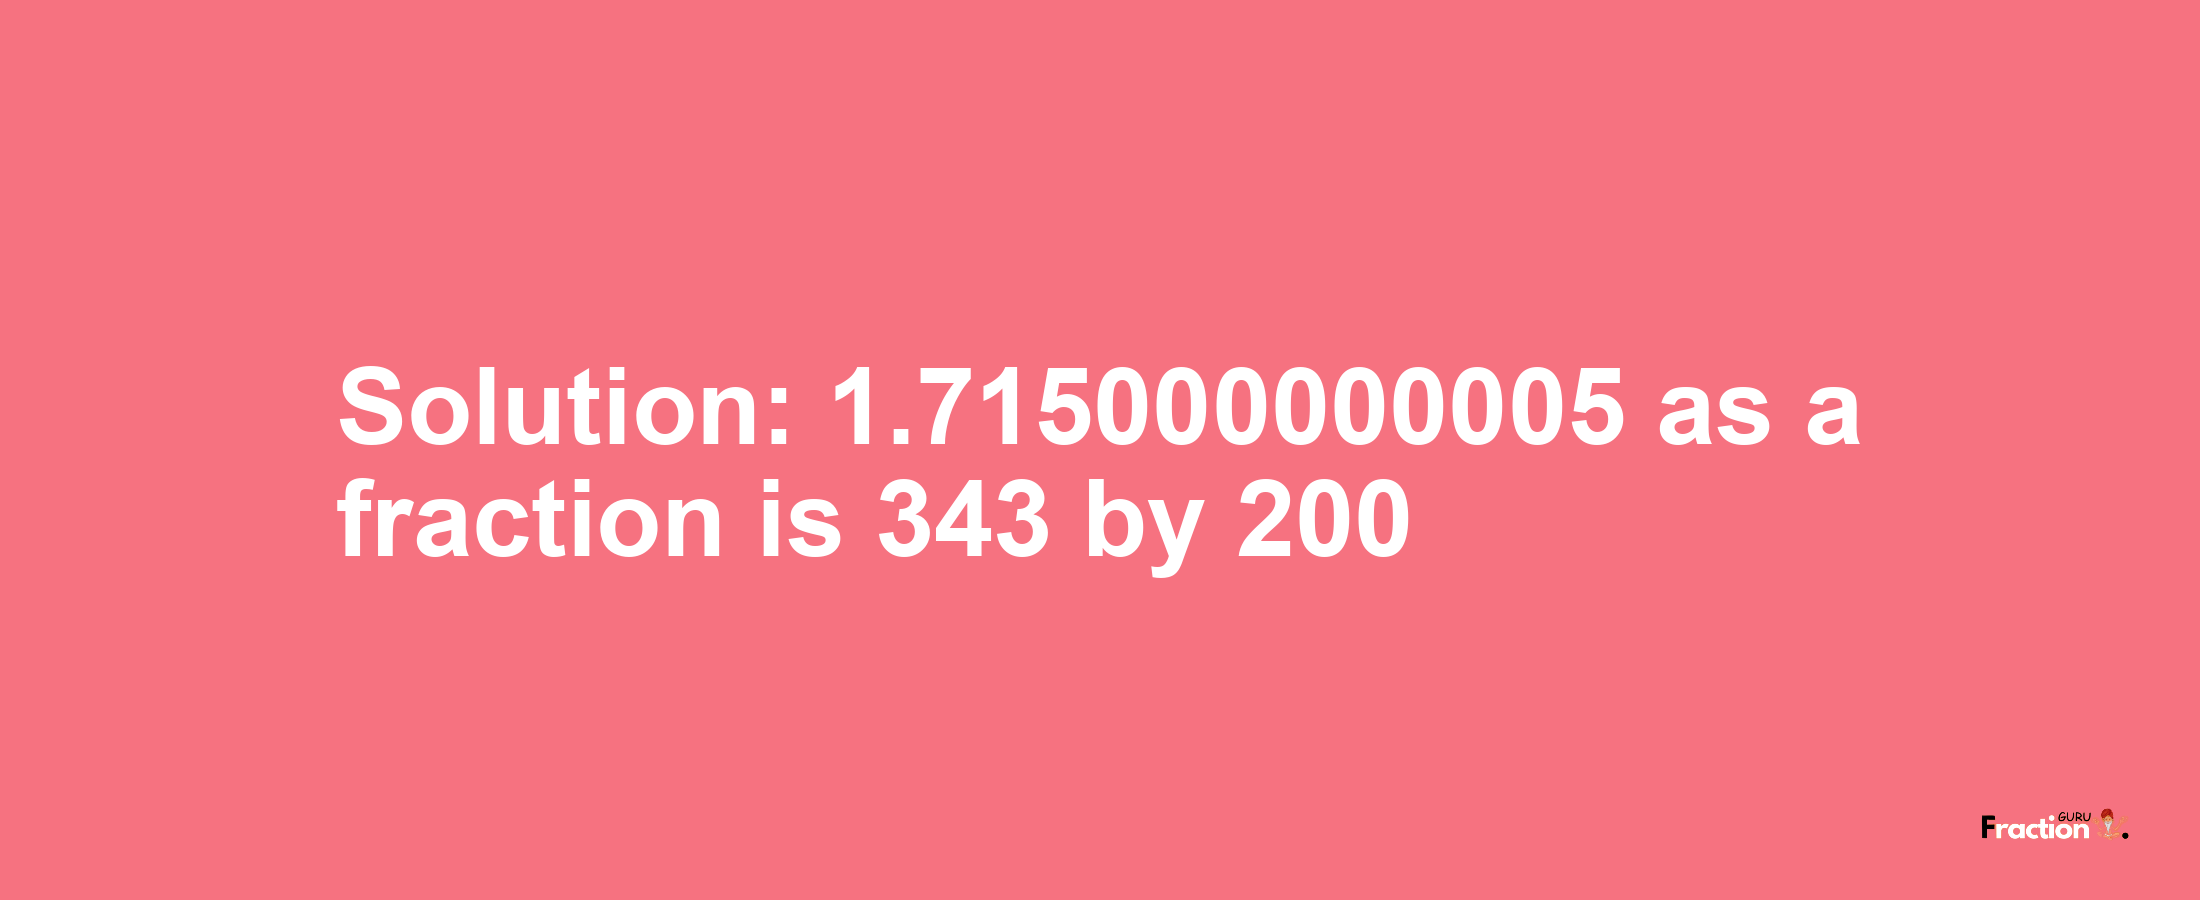 Solution:1.715000000005 as a fraction is 343/200